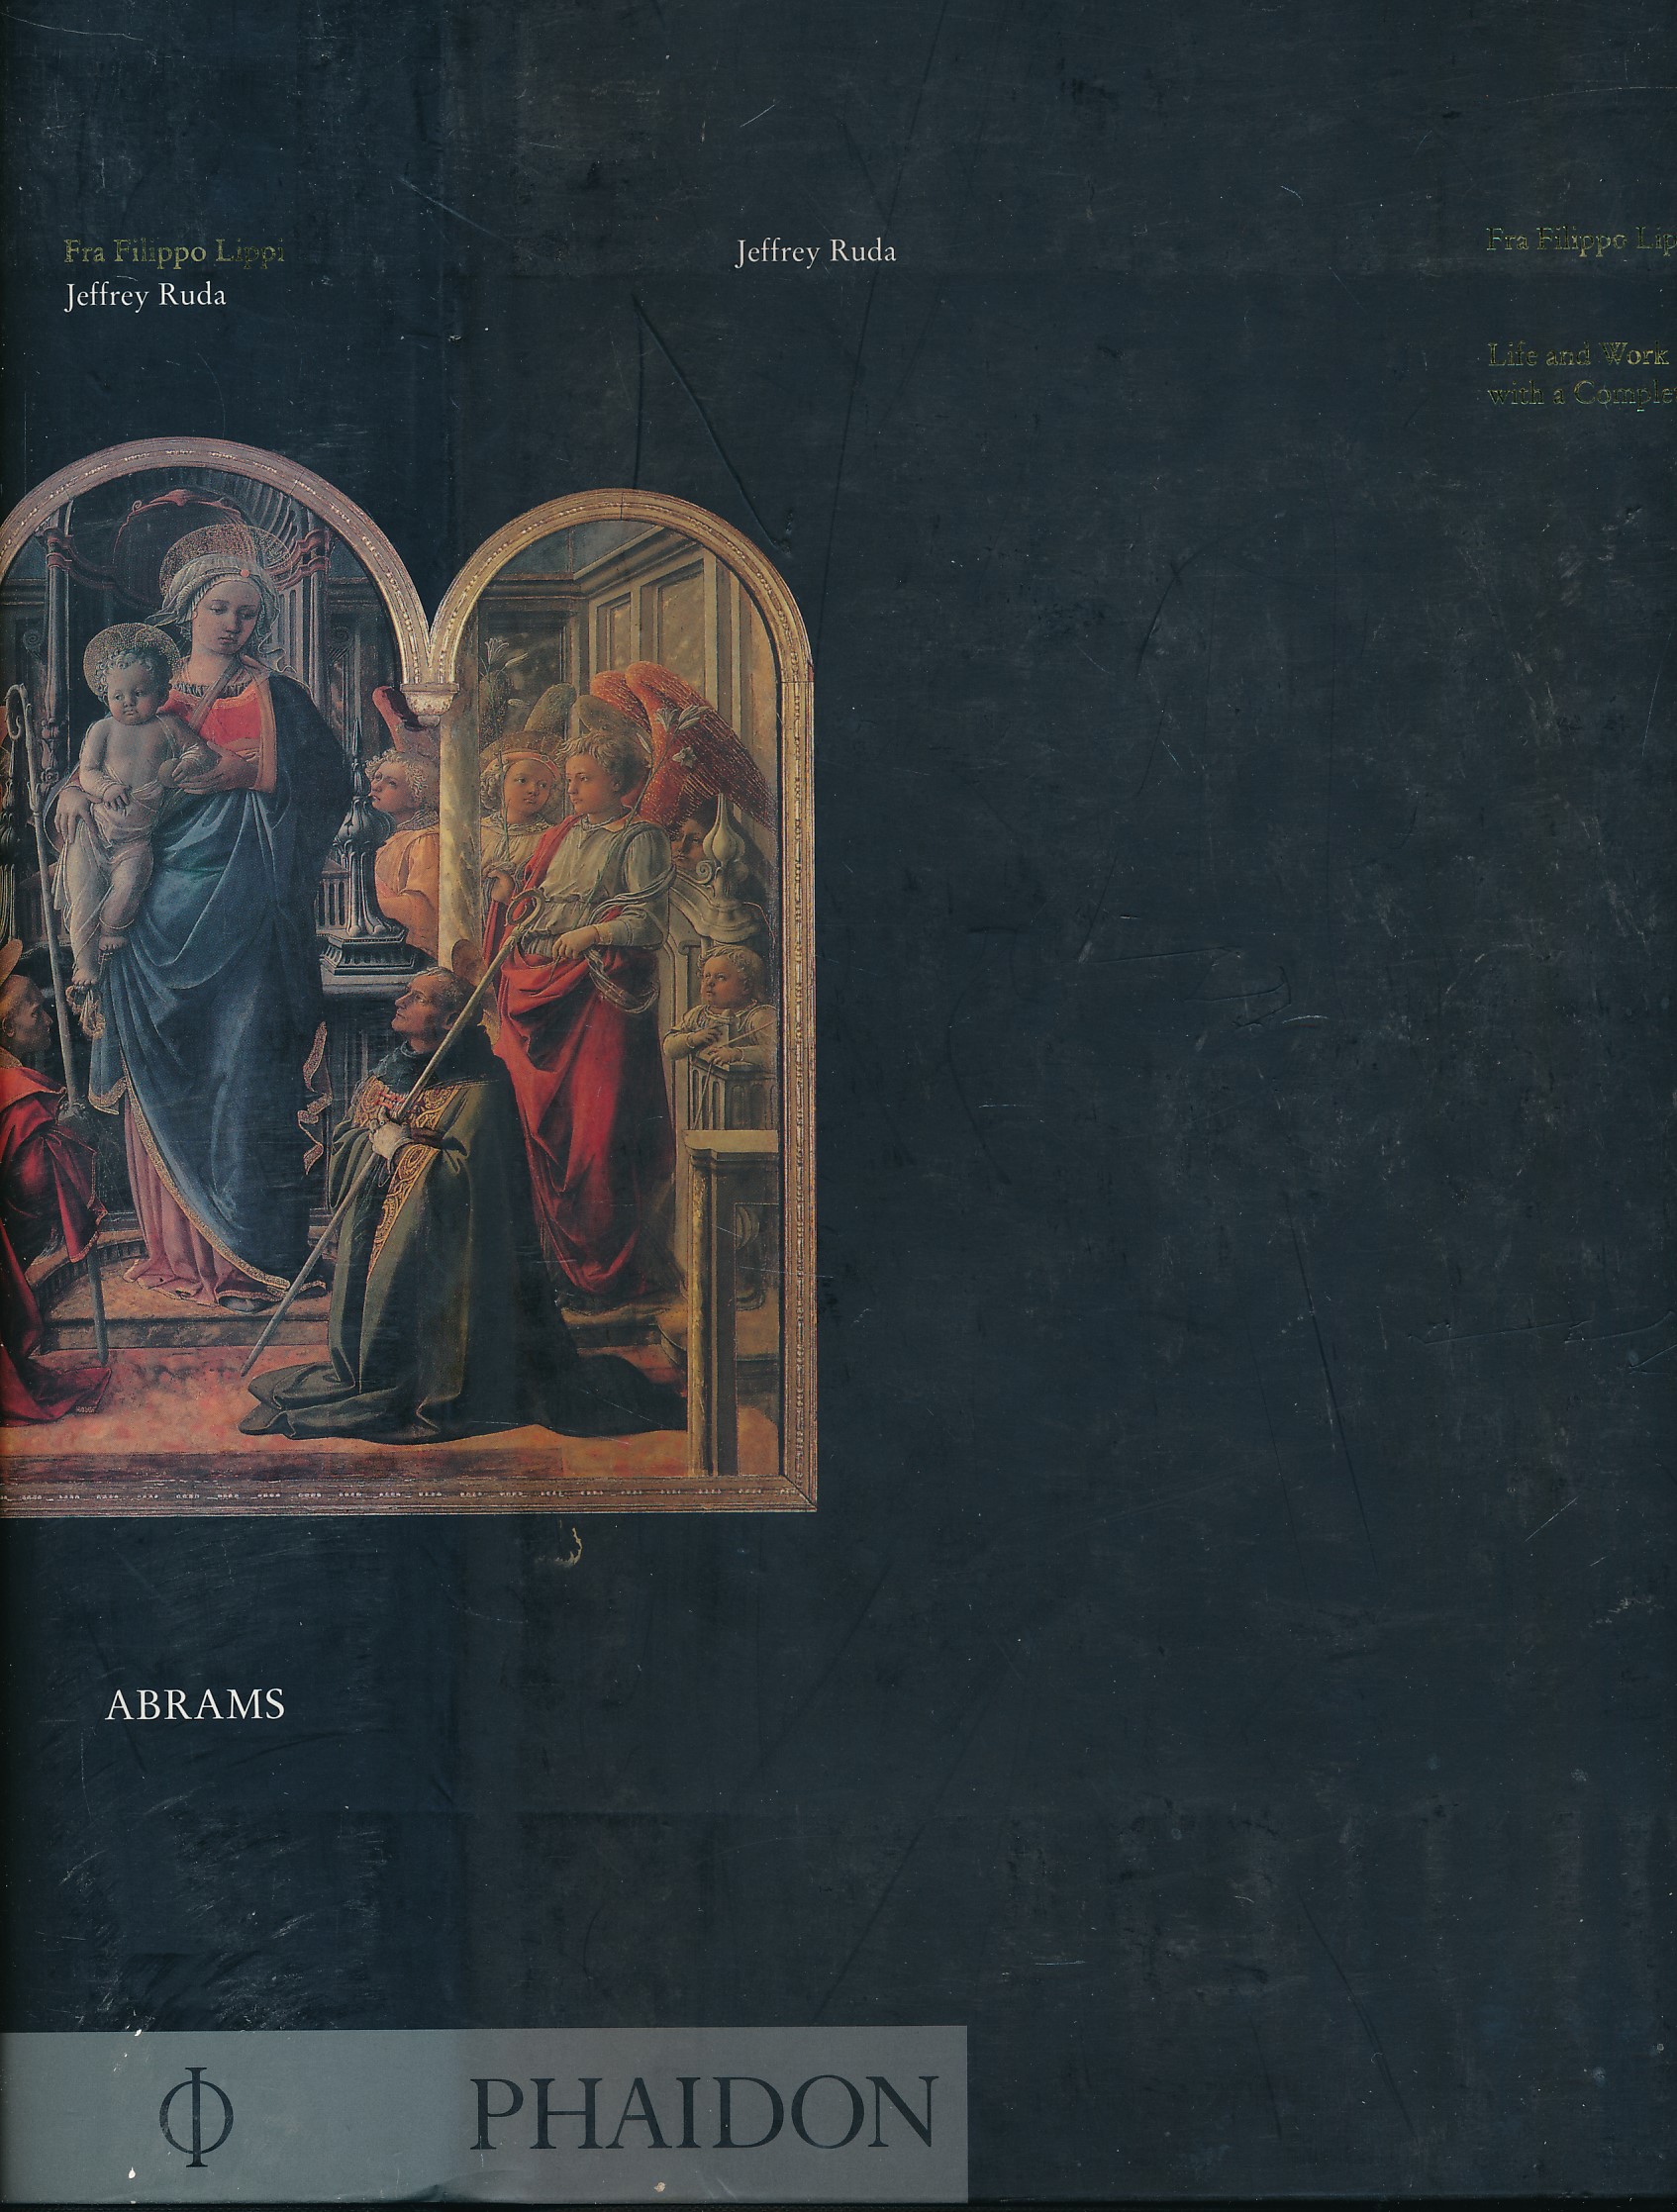 Fra Filippo Lippi. Life and Work with a Complete Catalogue